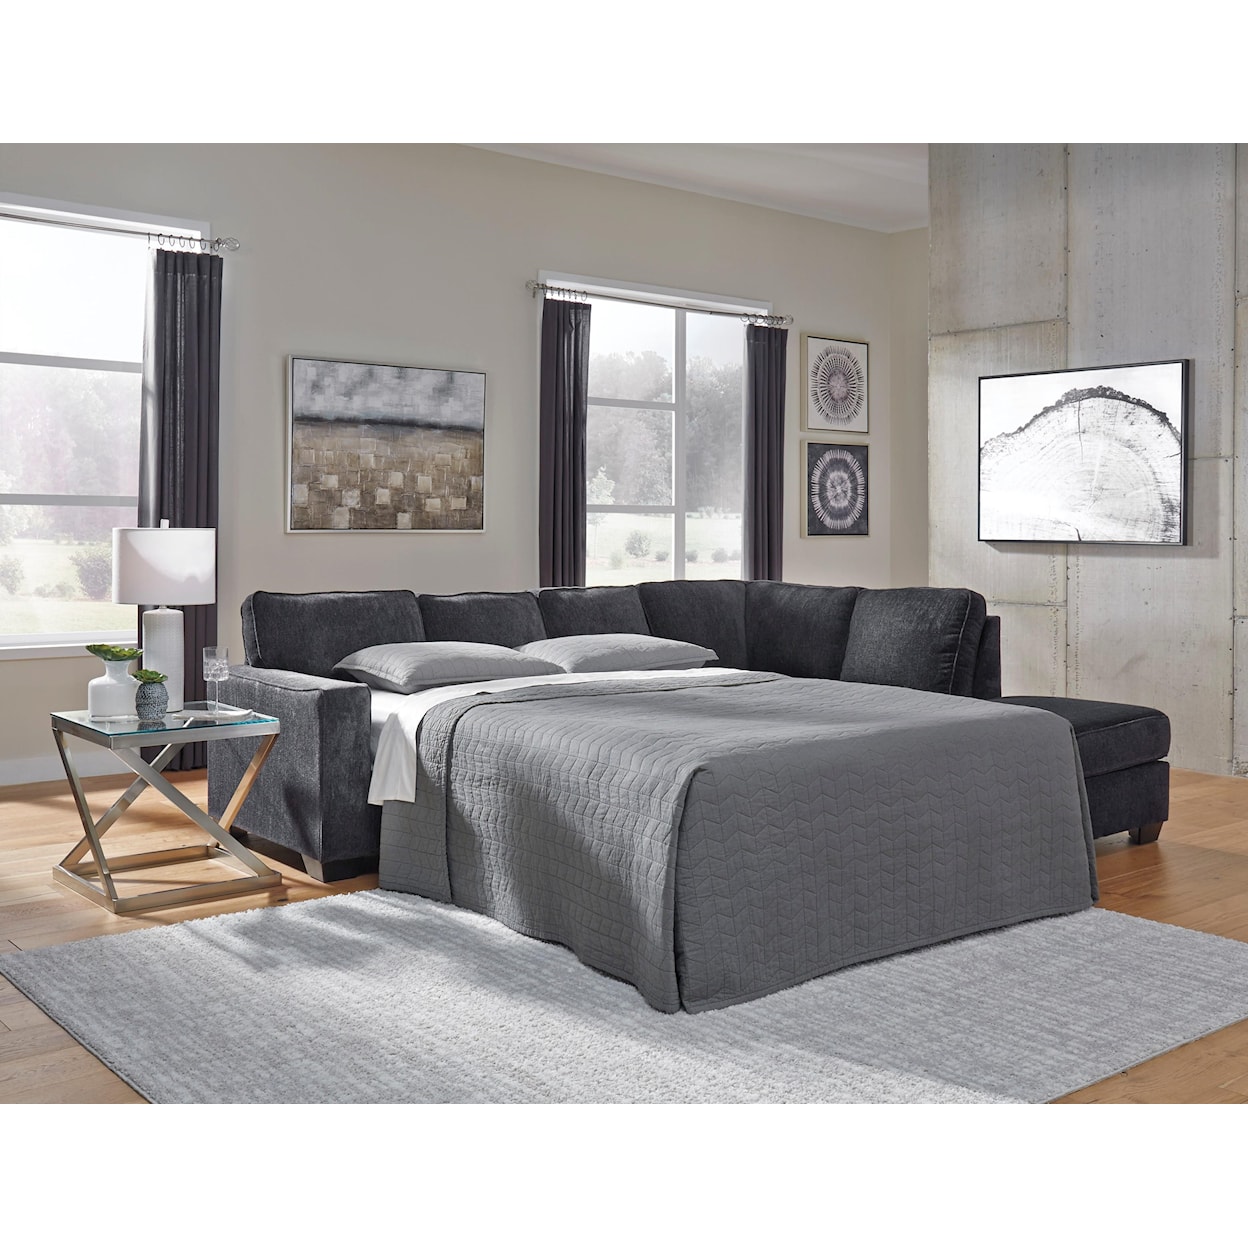 Signature Design by Ashley Altari 2 PC Sleeper Sectional and Chair Set